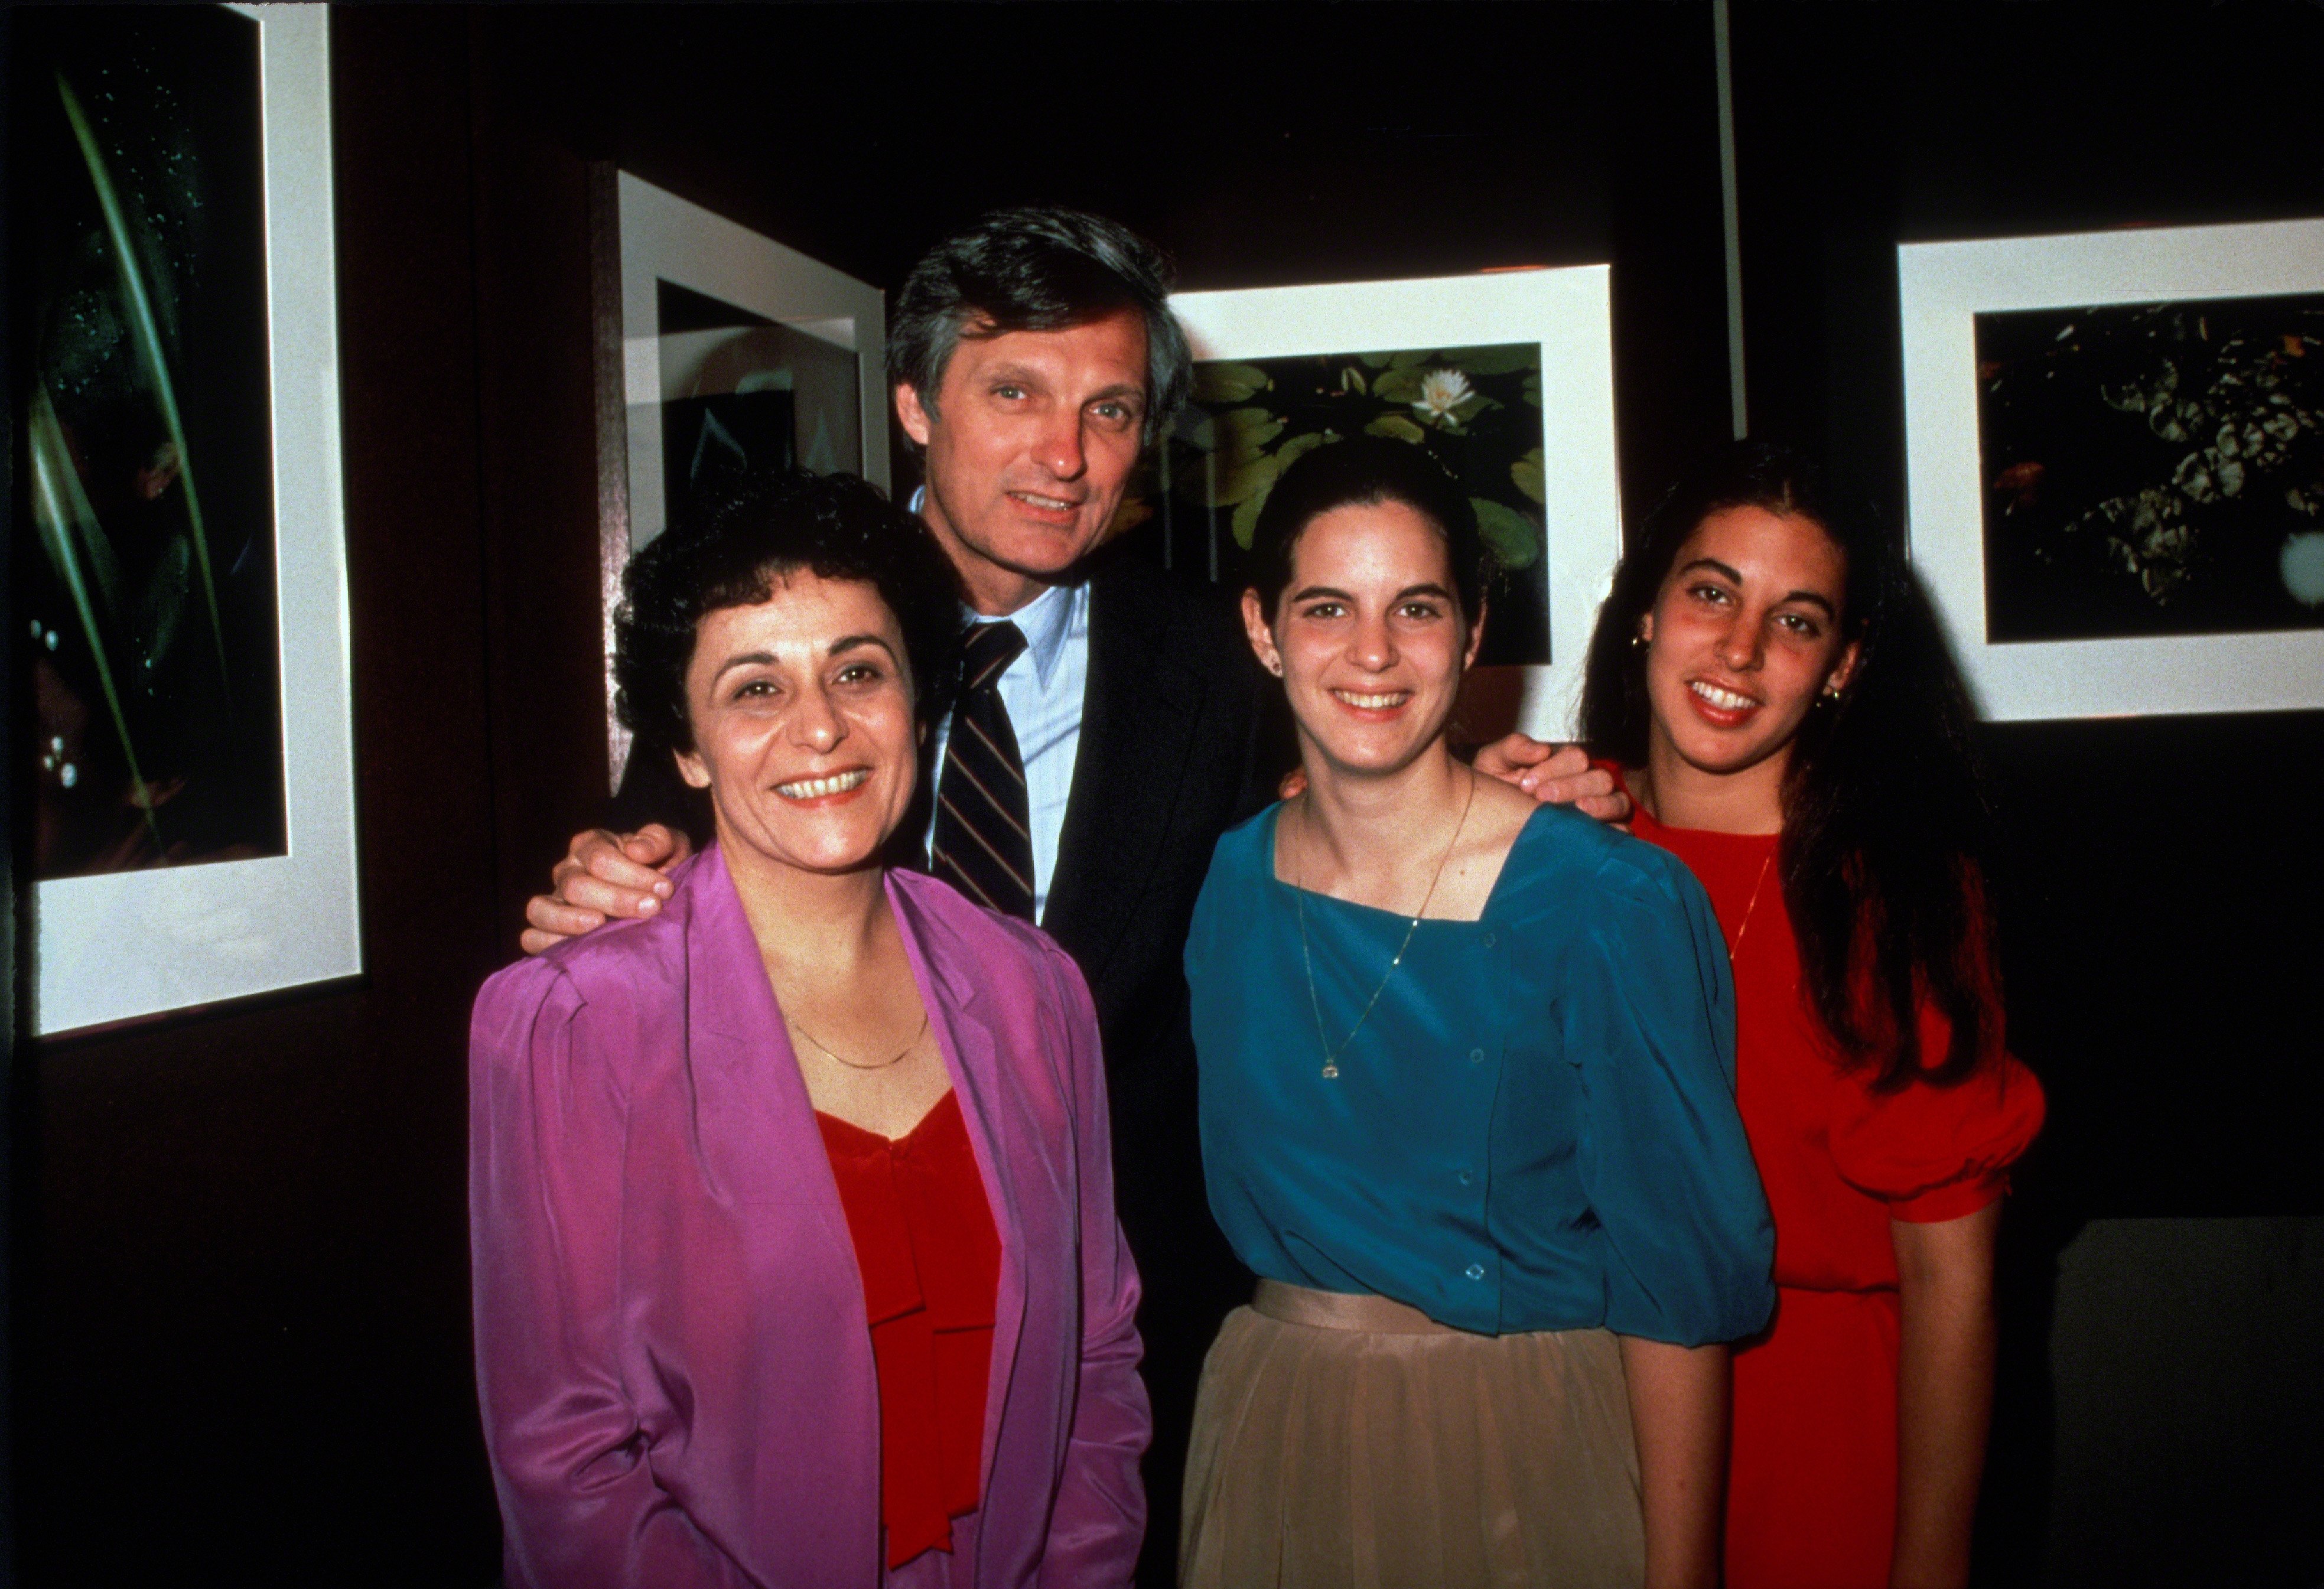 Alan Alda, his wife Arlene and two of their daughters in 1981, New York City. | Source: Getty Images